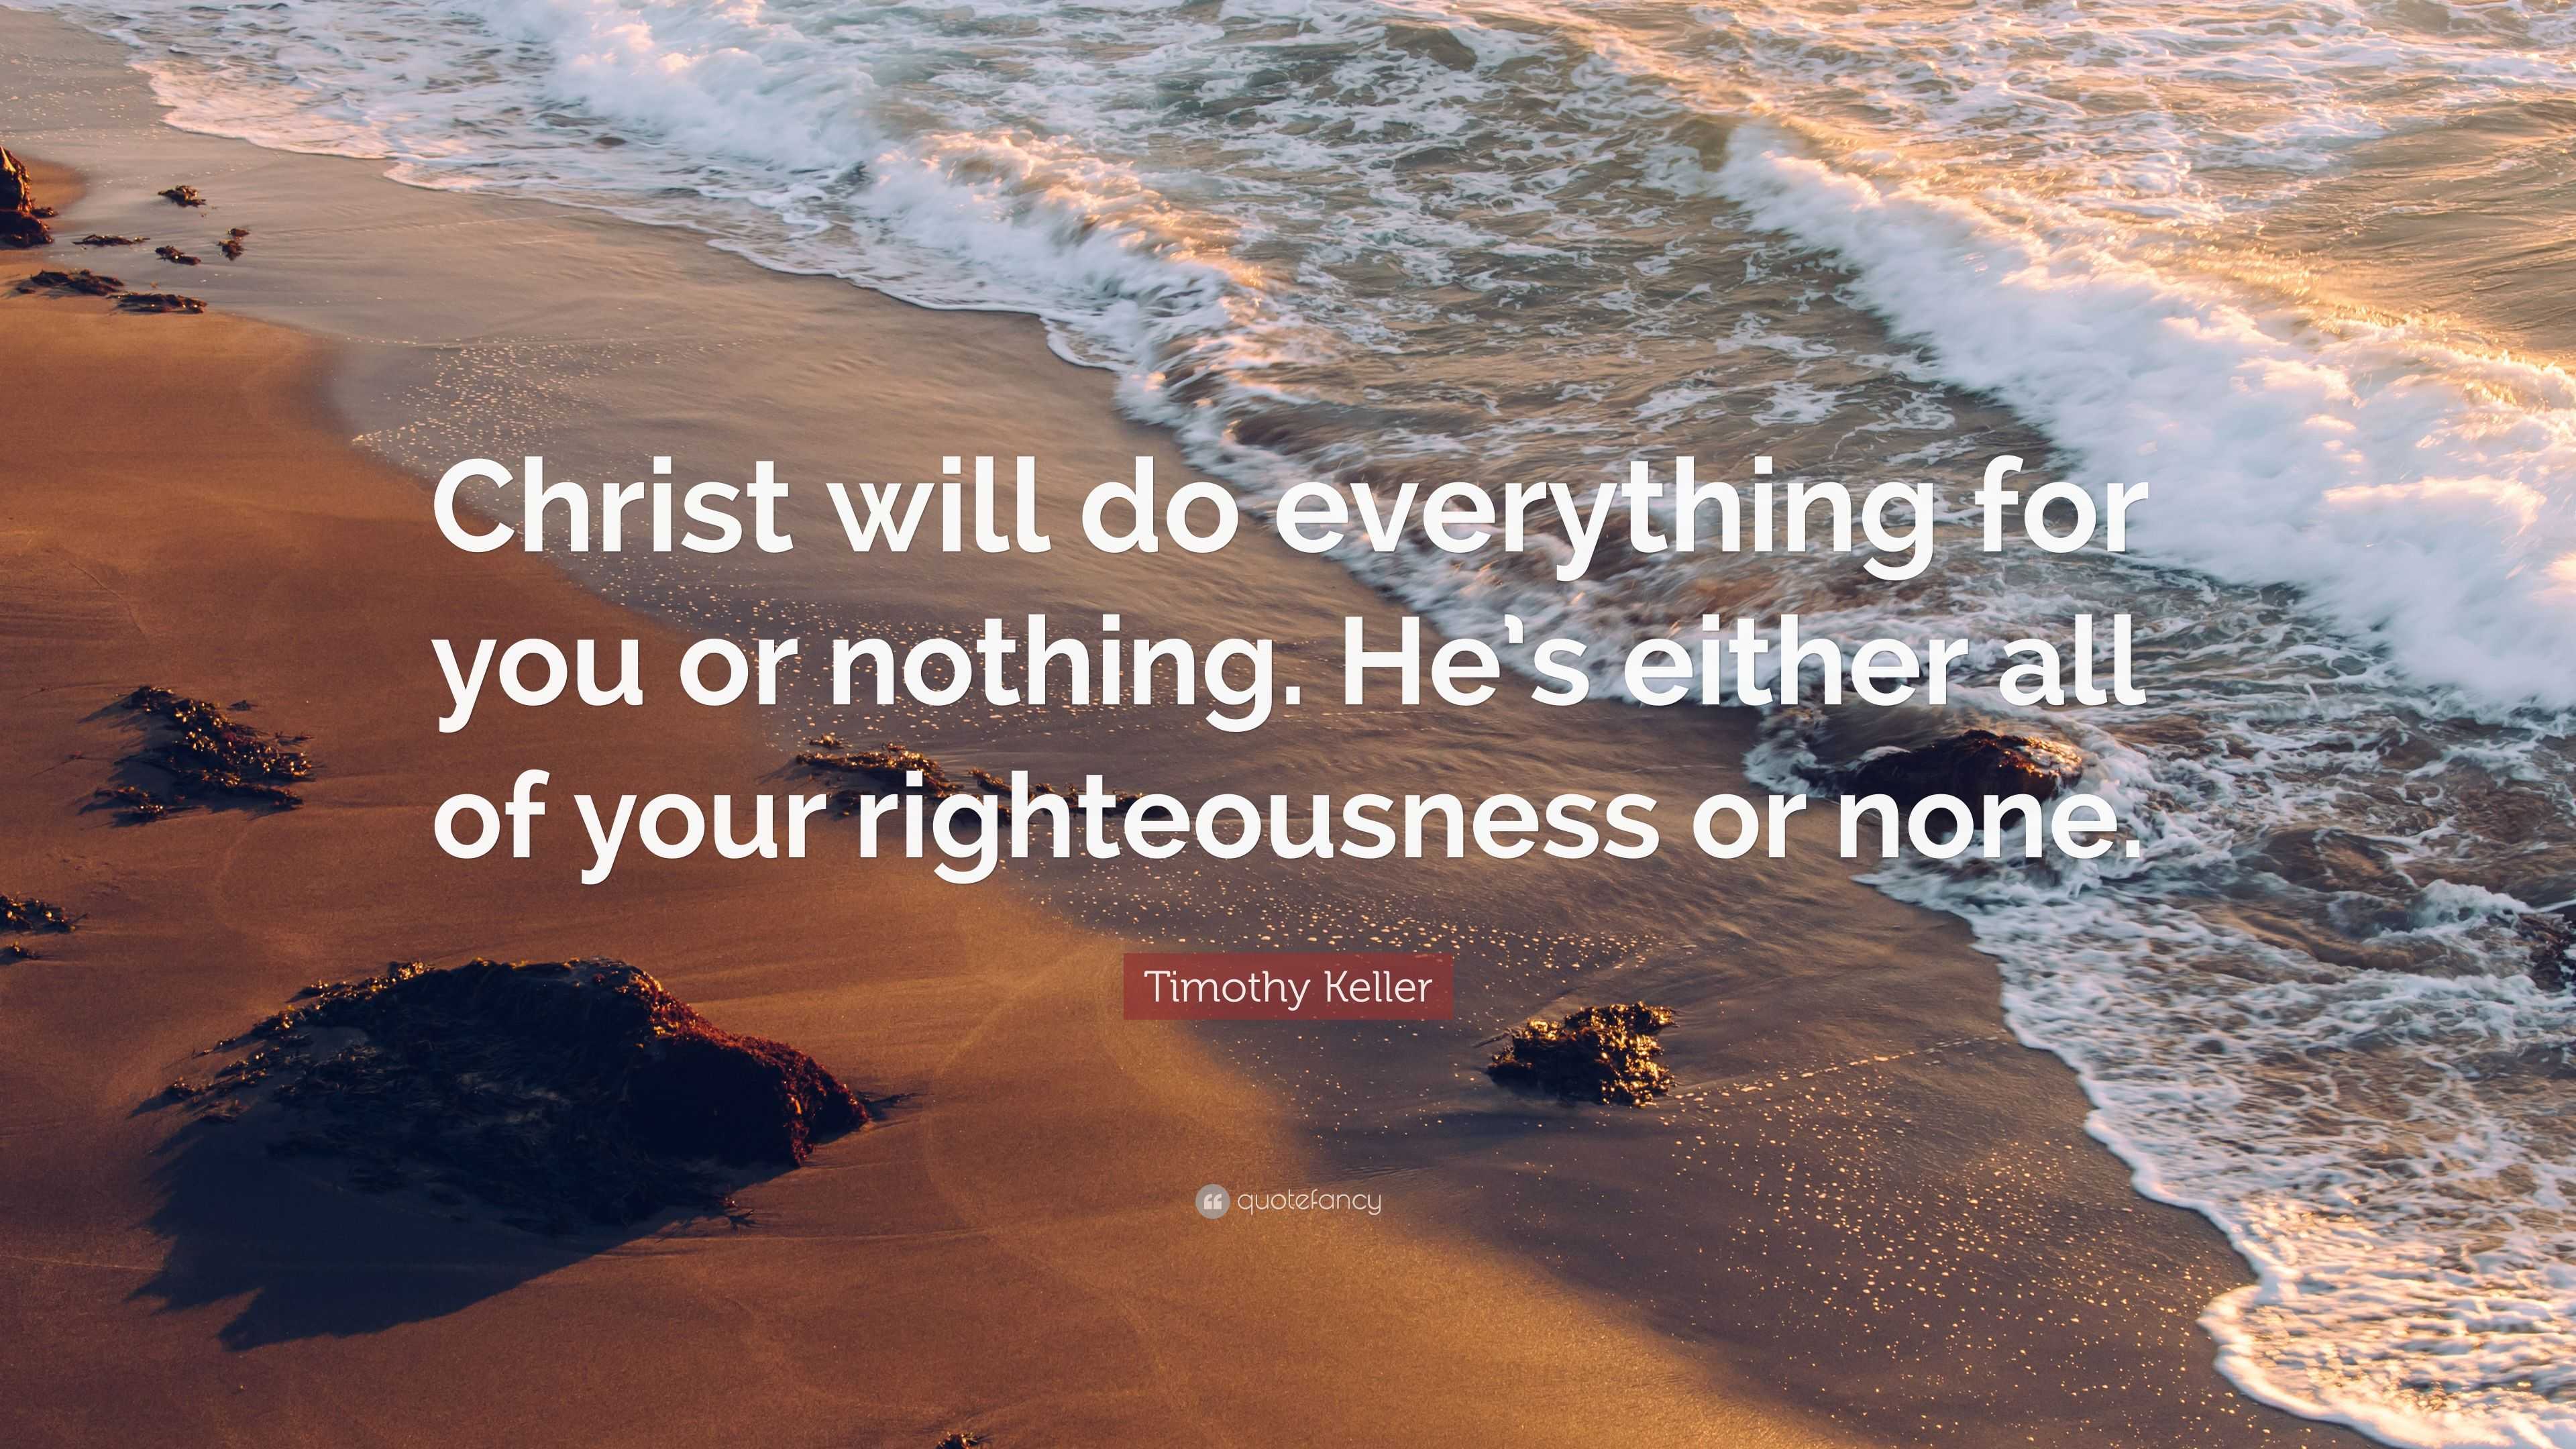 Timothy Keller Quote: “Christ will do everything for you or nothing. He's either  all of your